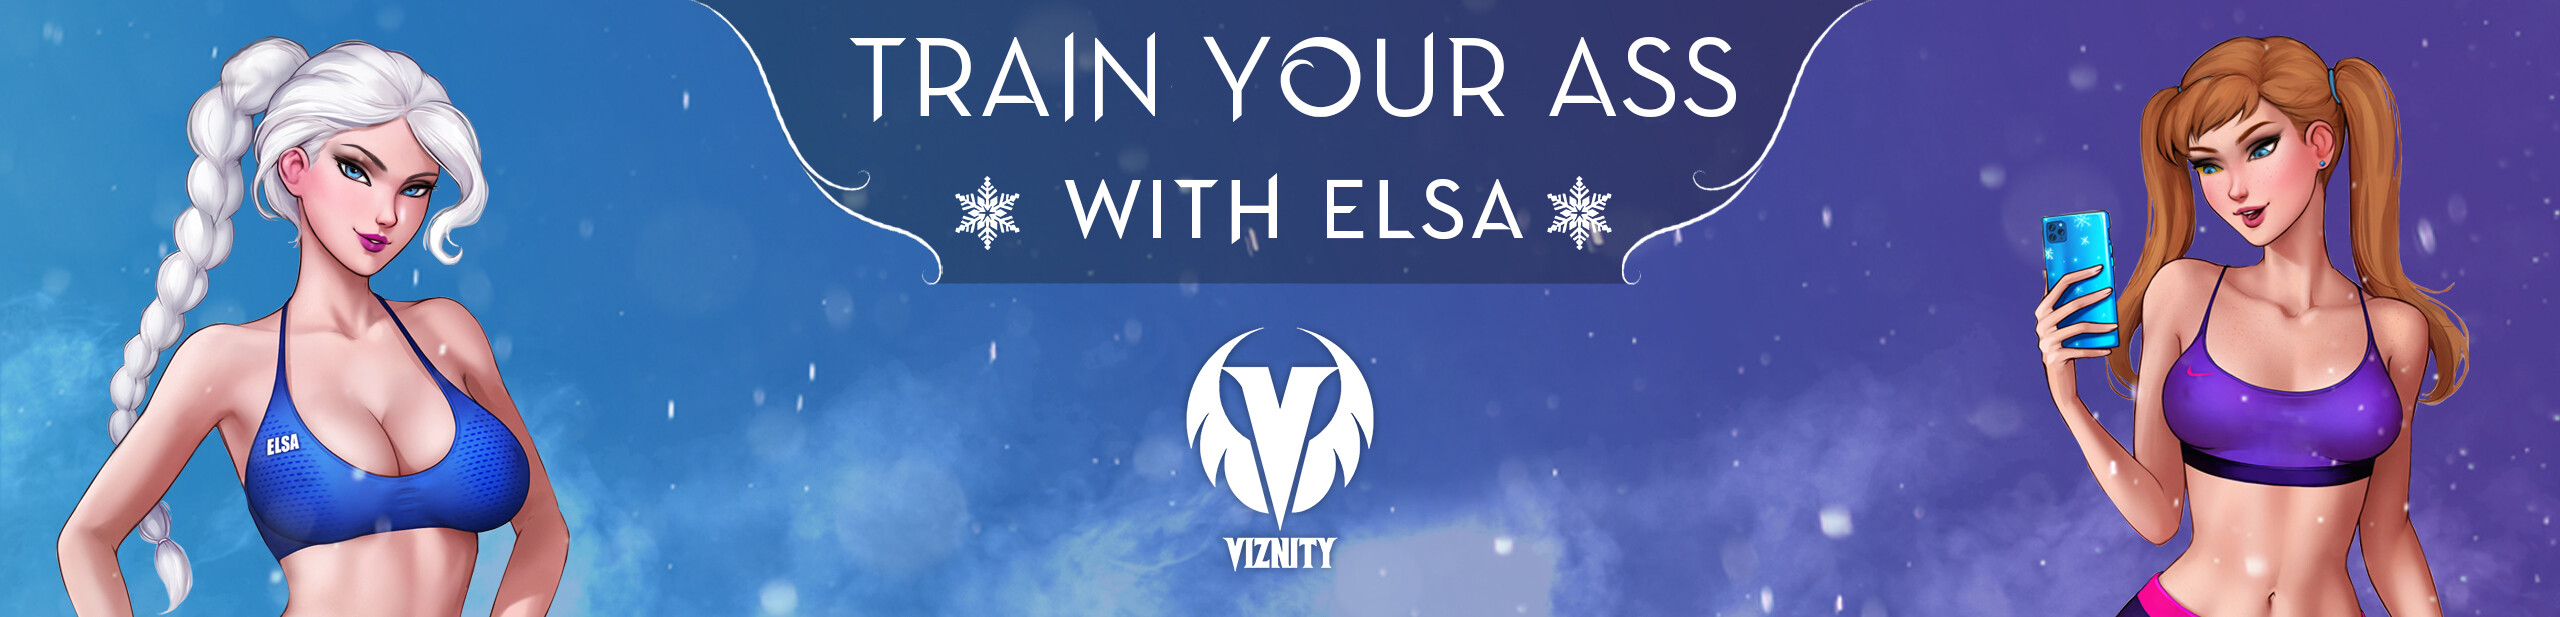 Train Your Ass With Elsa Main Image